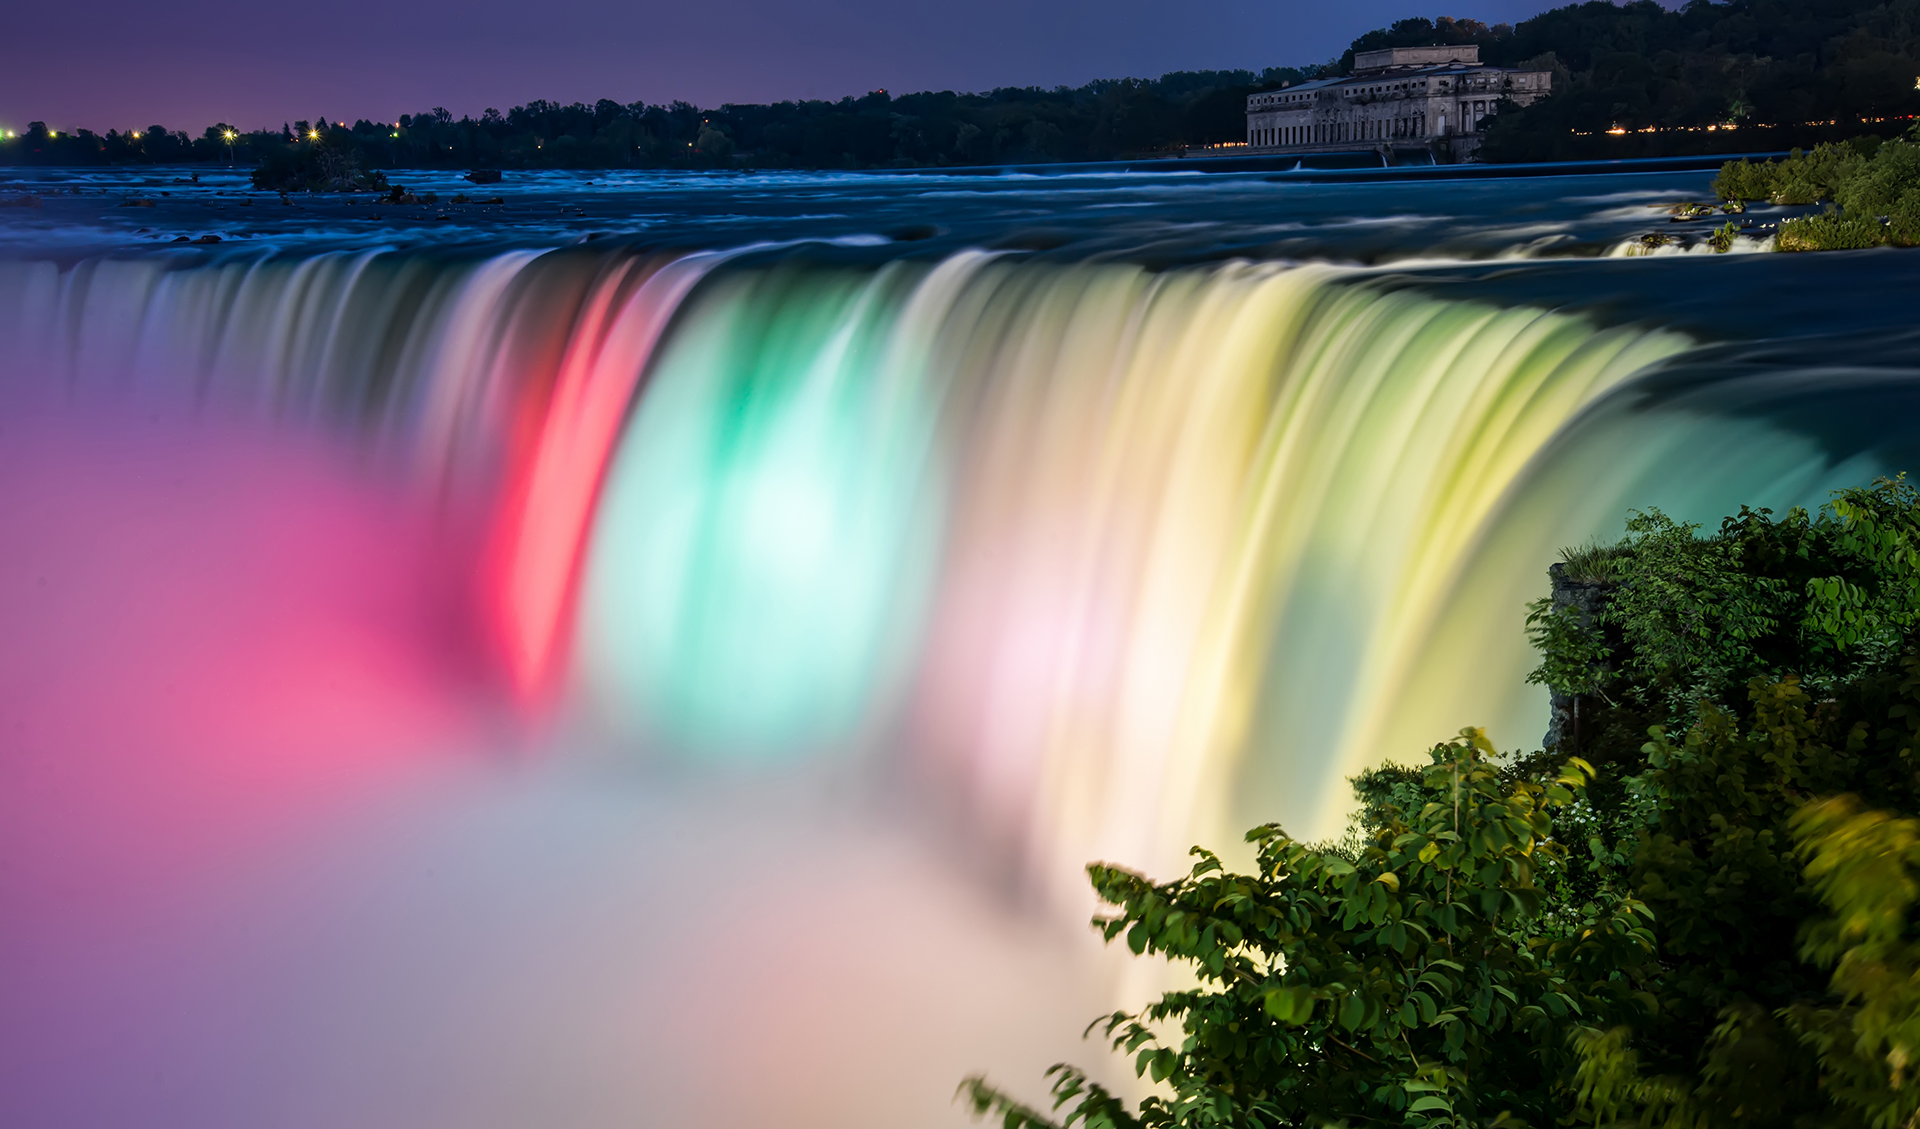  August 12 2015 By admin Comments Off on Niagara Waterfalls Wallpapers 1920x1129